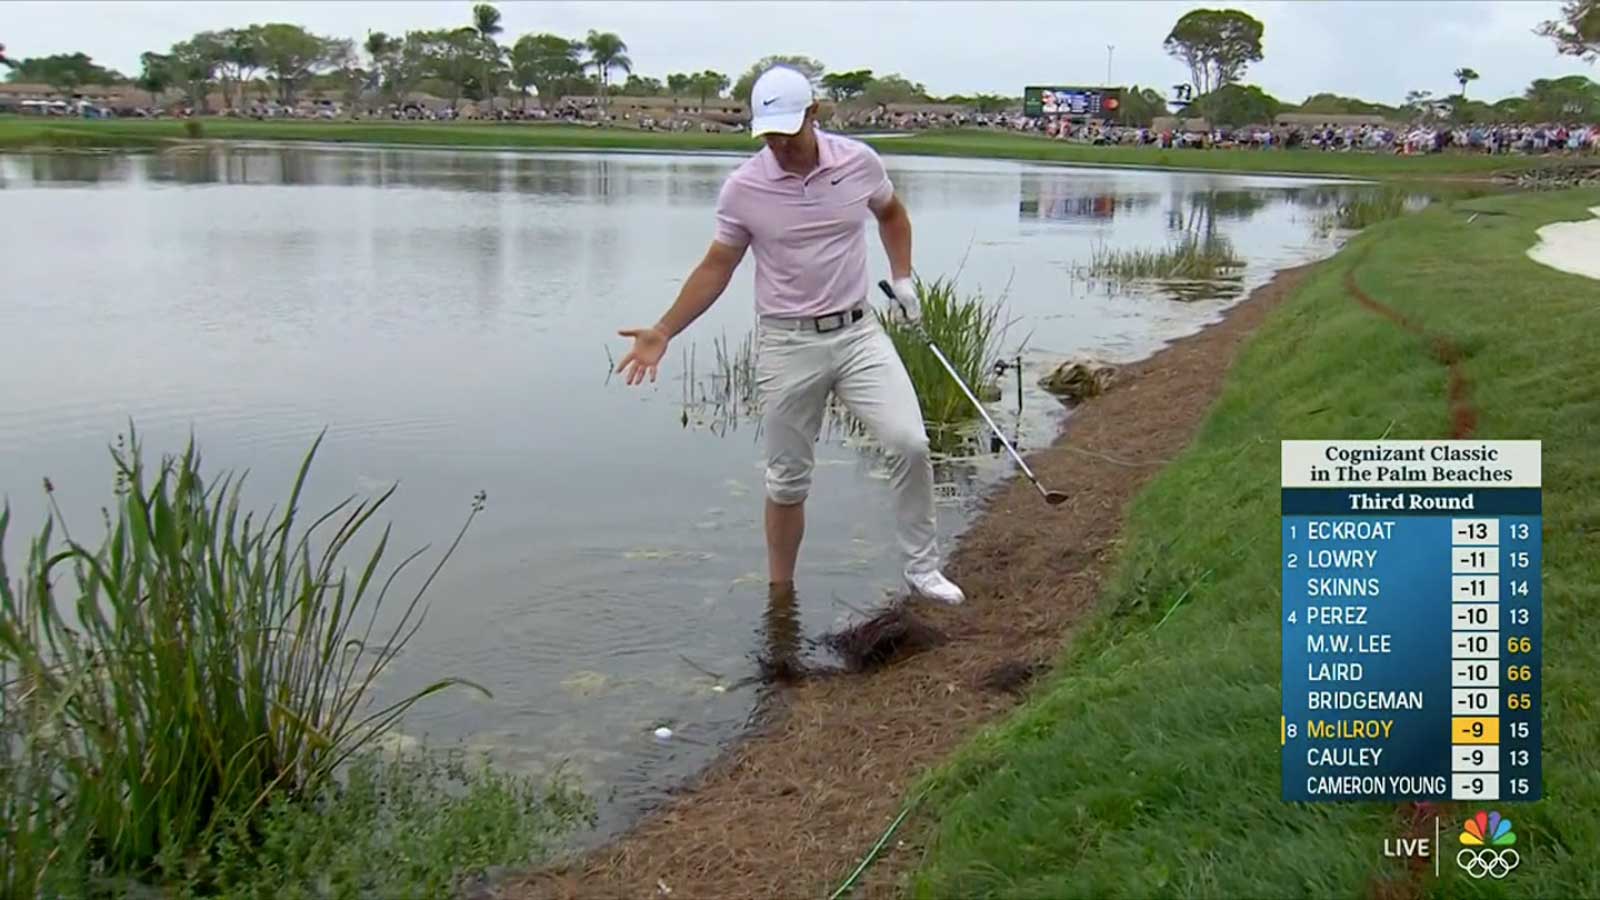 Rory McIlroy fails to flee pond, makes disastrous triple: WATCH